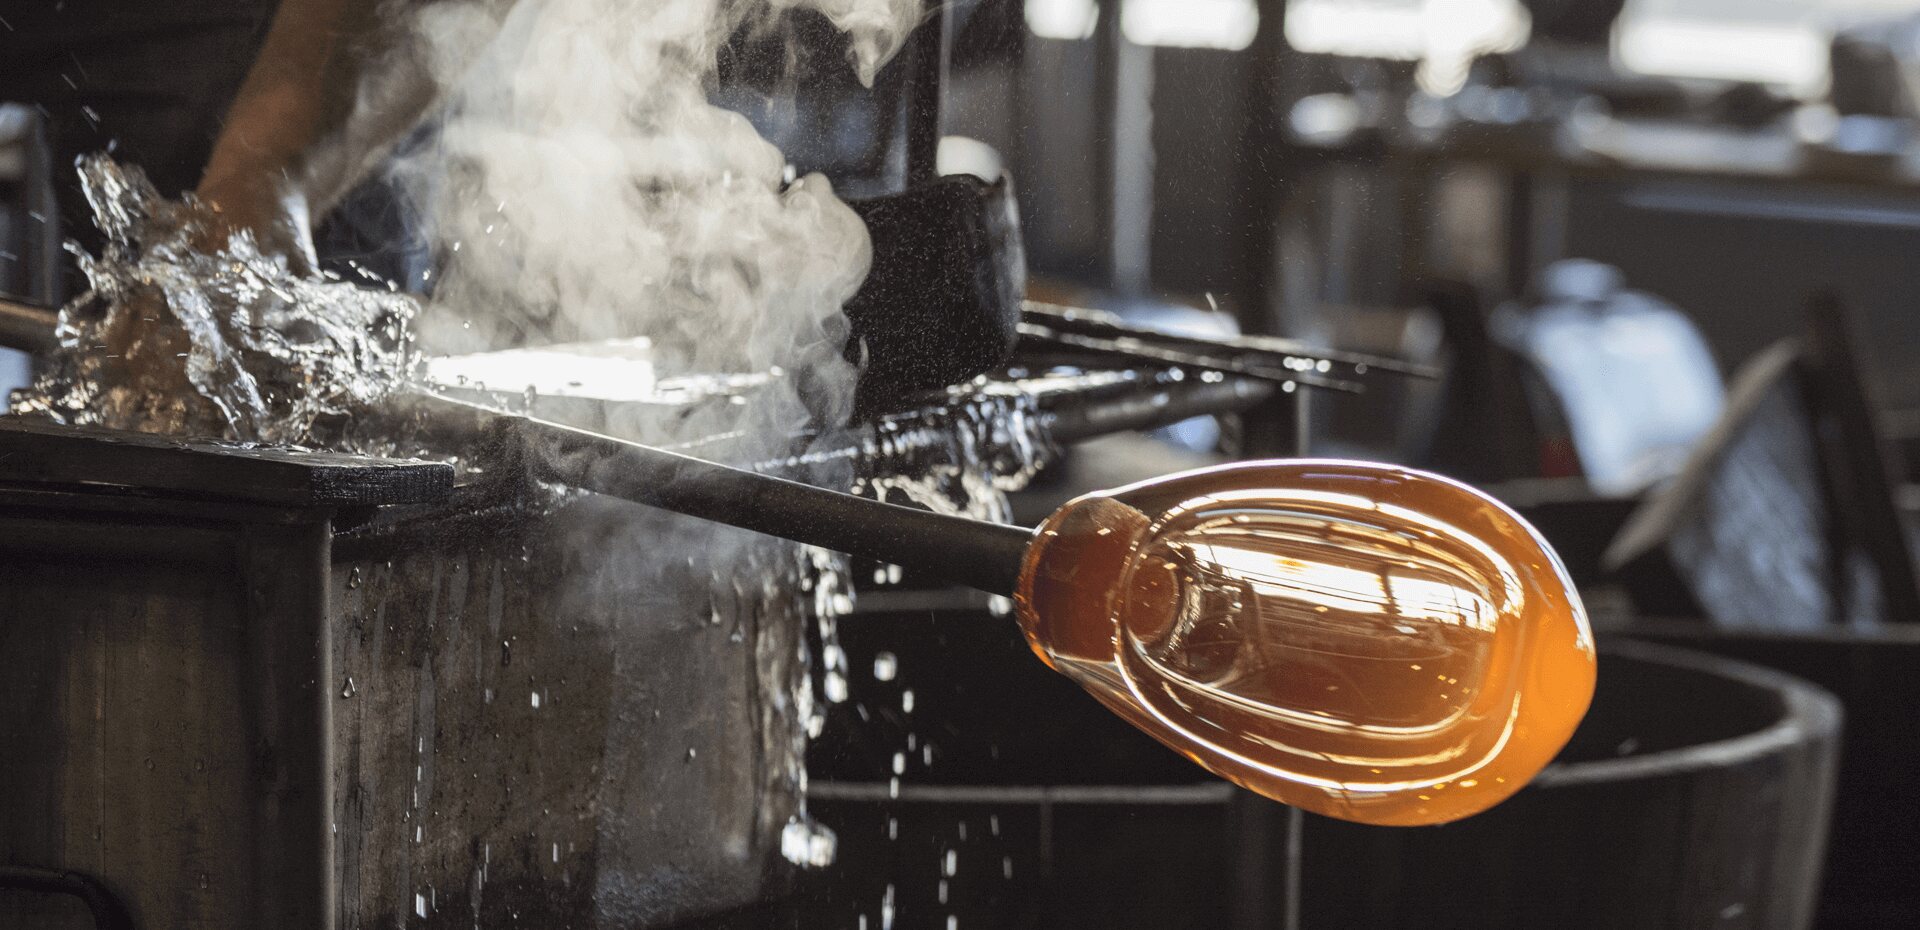 the glassblowing process